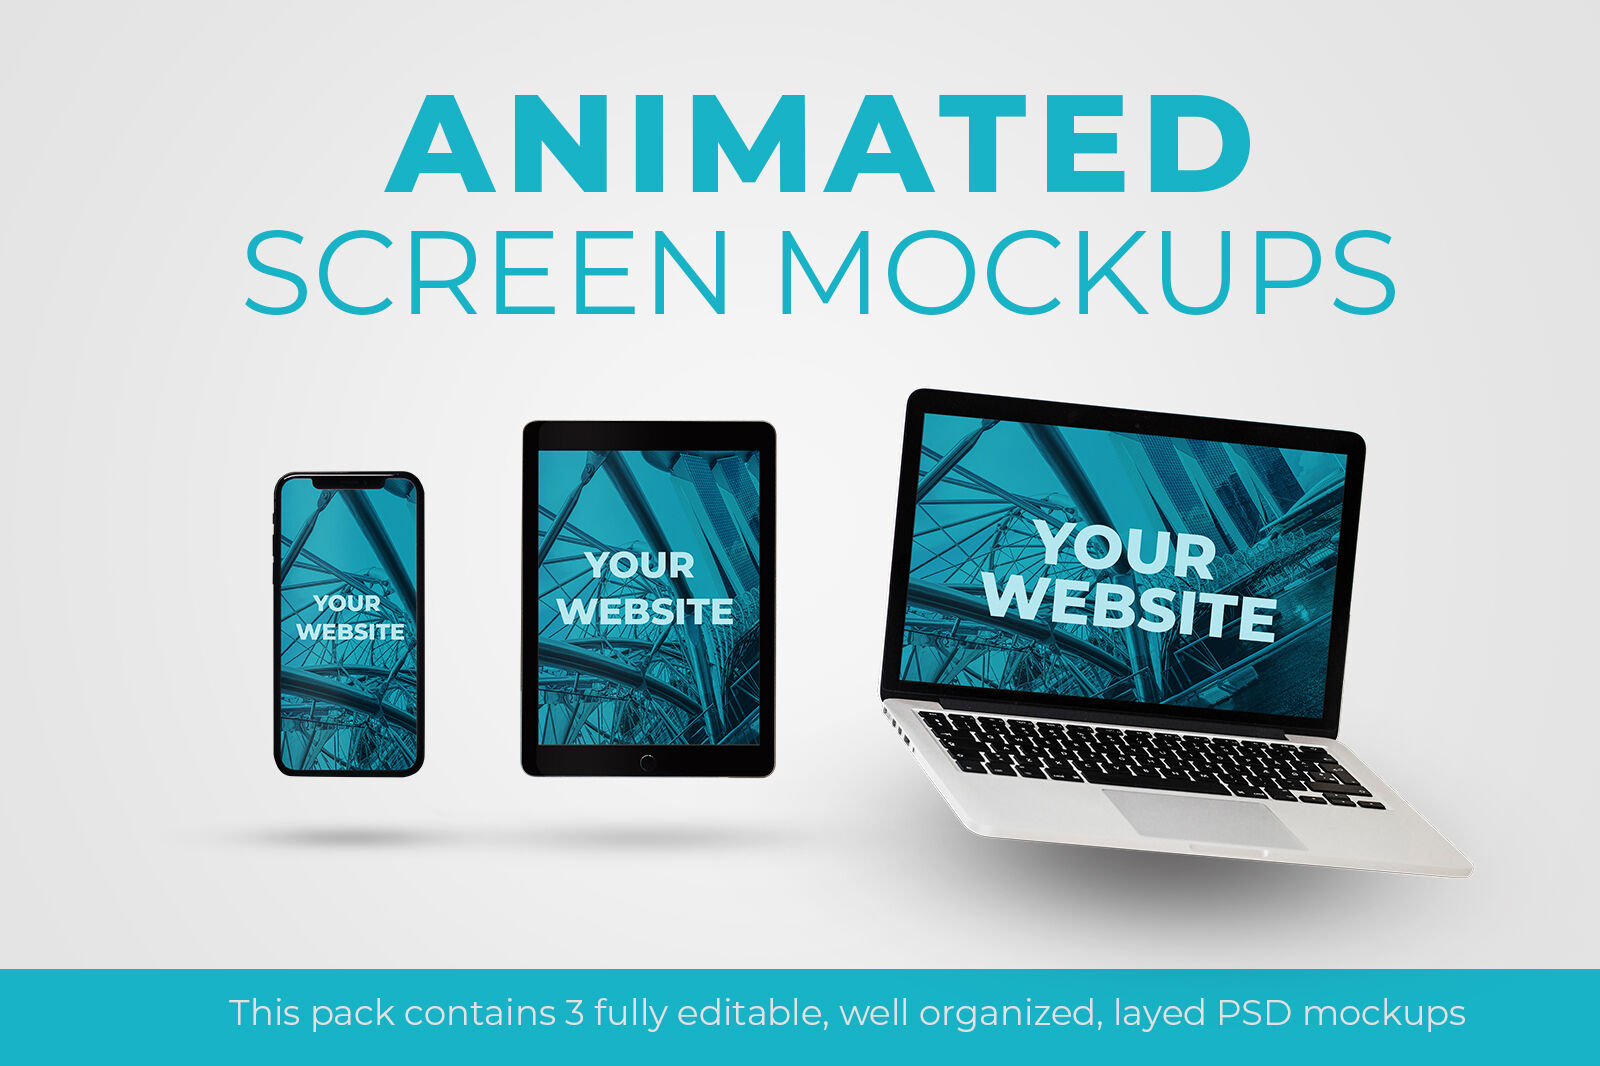 Download Animated screen mock ups By FSMCKPS | TheHungryJPEG.com